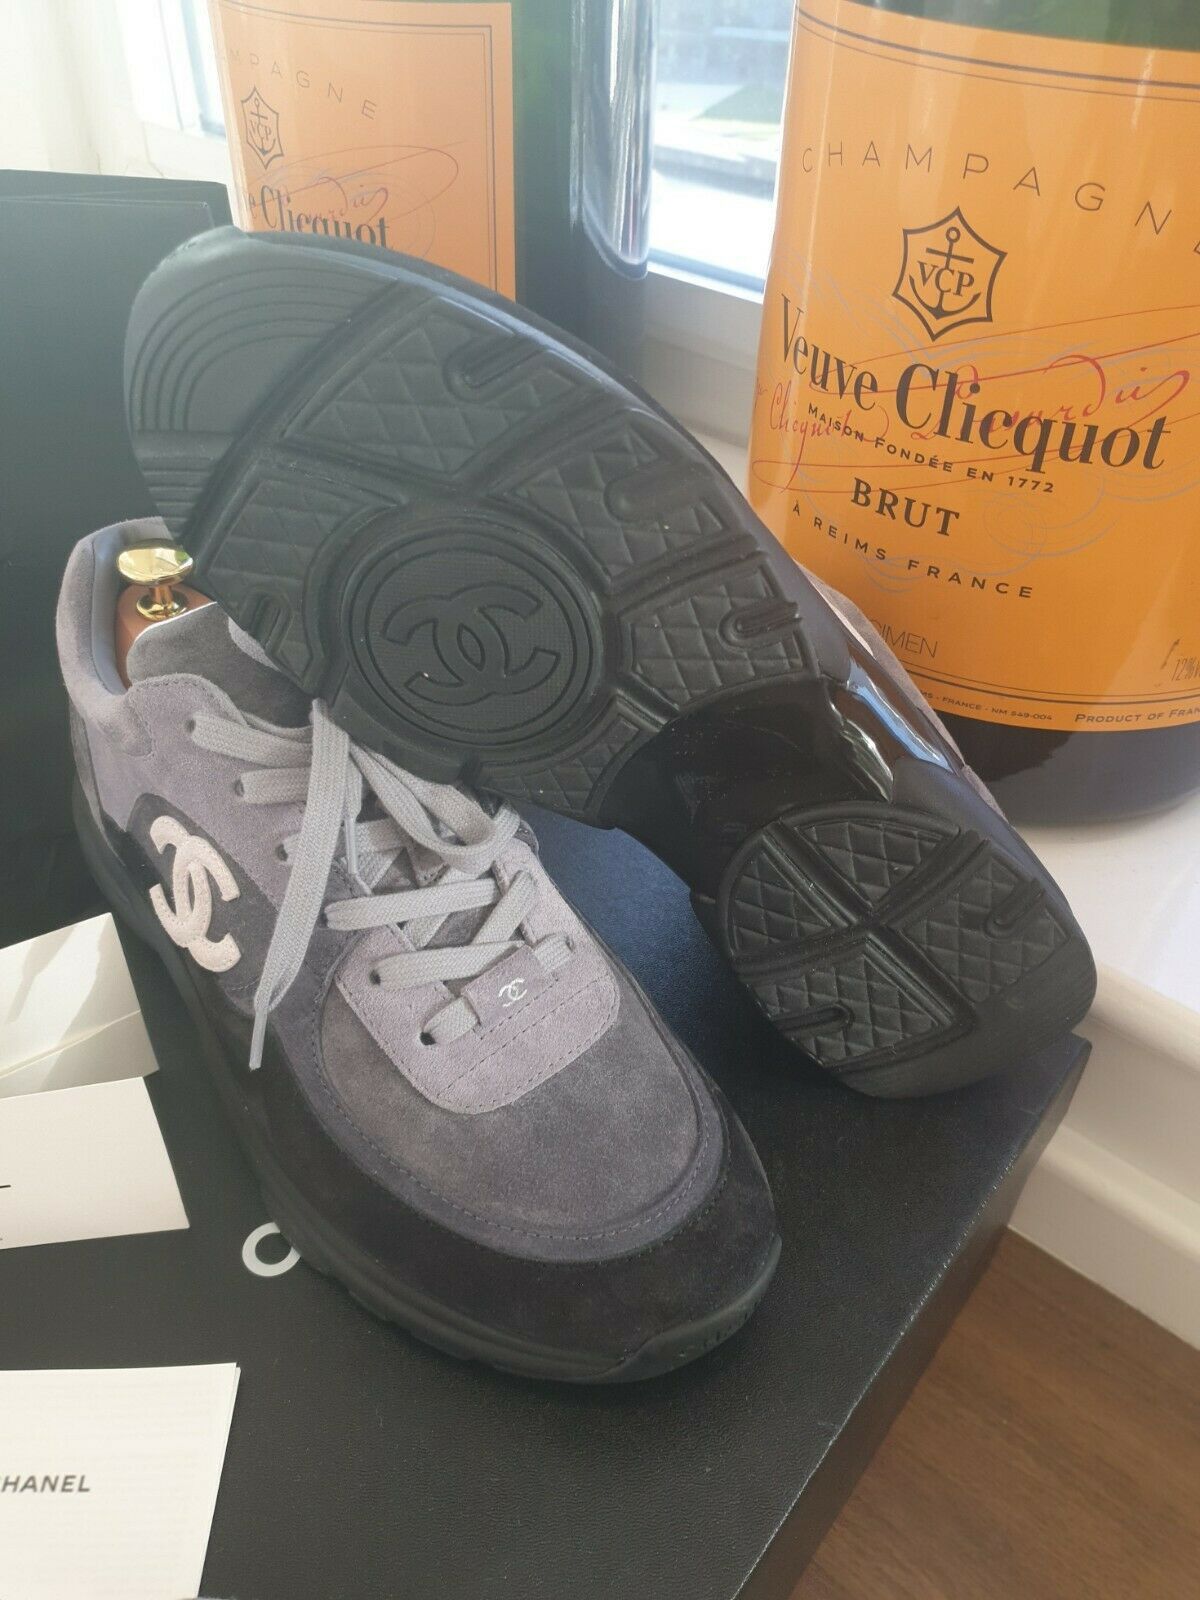 Chanel NEW Chanel CC Race Runner Sneakers 43 Shoes Grey Suede Size US 10 / EU 43 - 7 Thumbnail